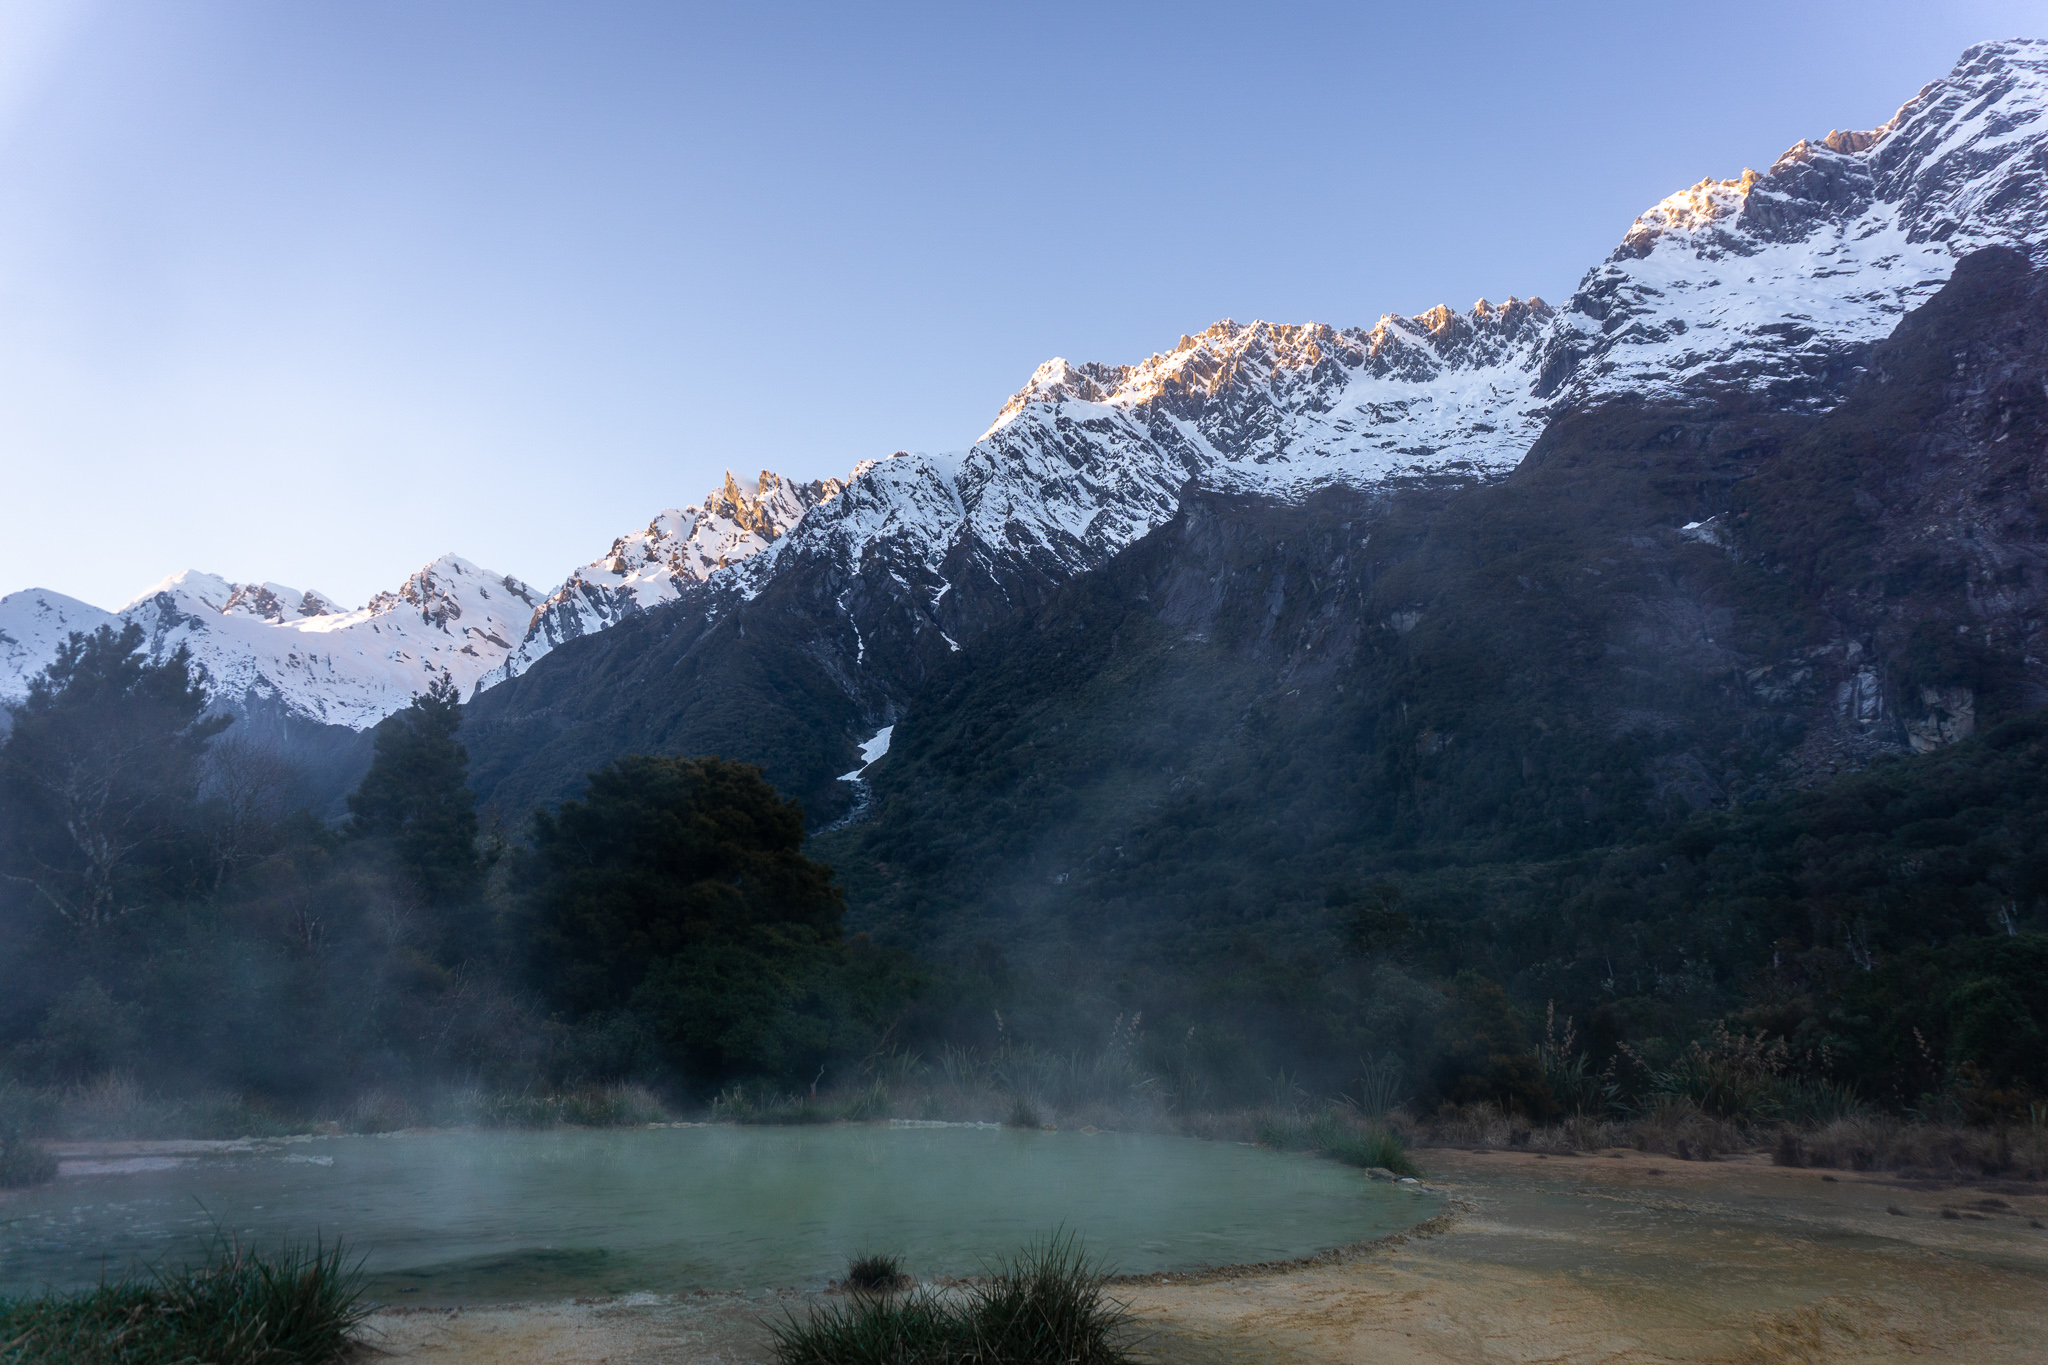 Welcome Flat natural hotpools steaming with dawn light just hitting the tops of the snowcapped mountains in the background